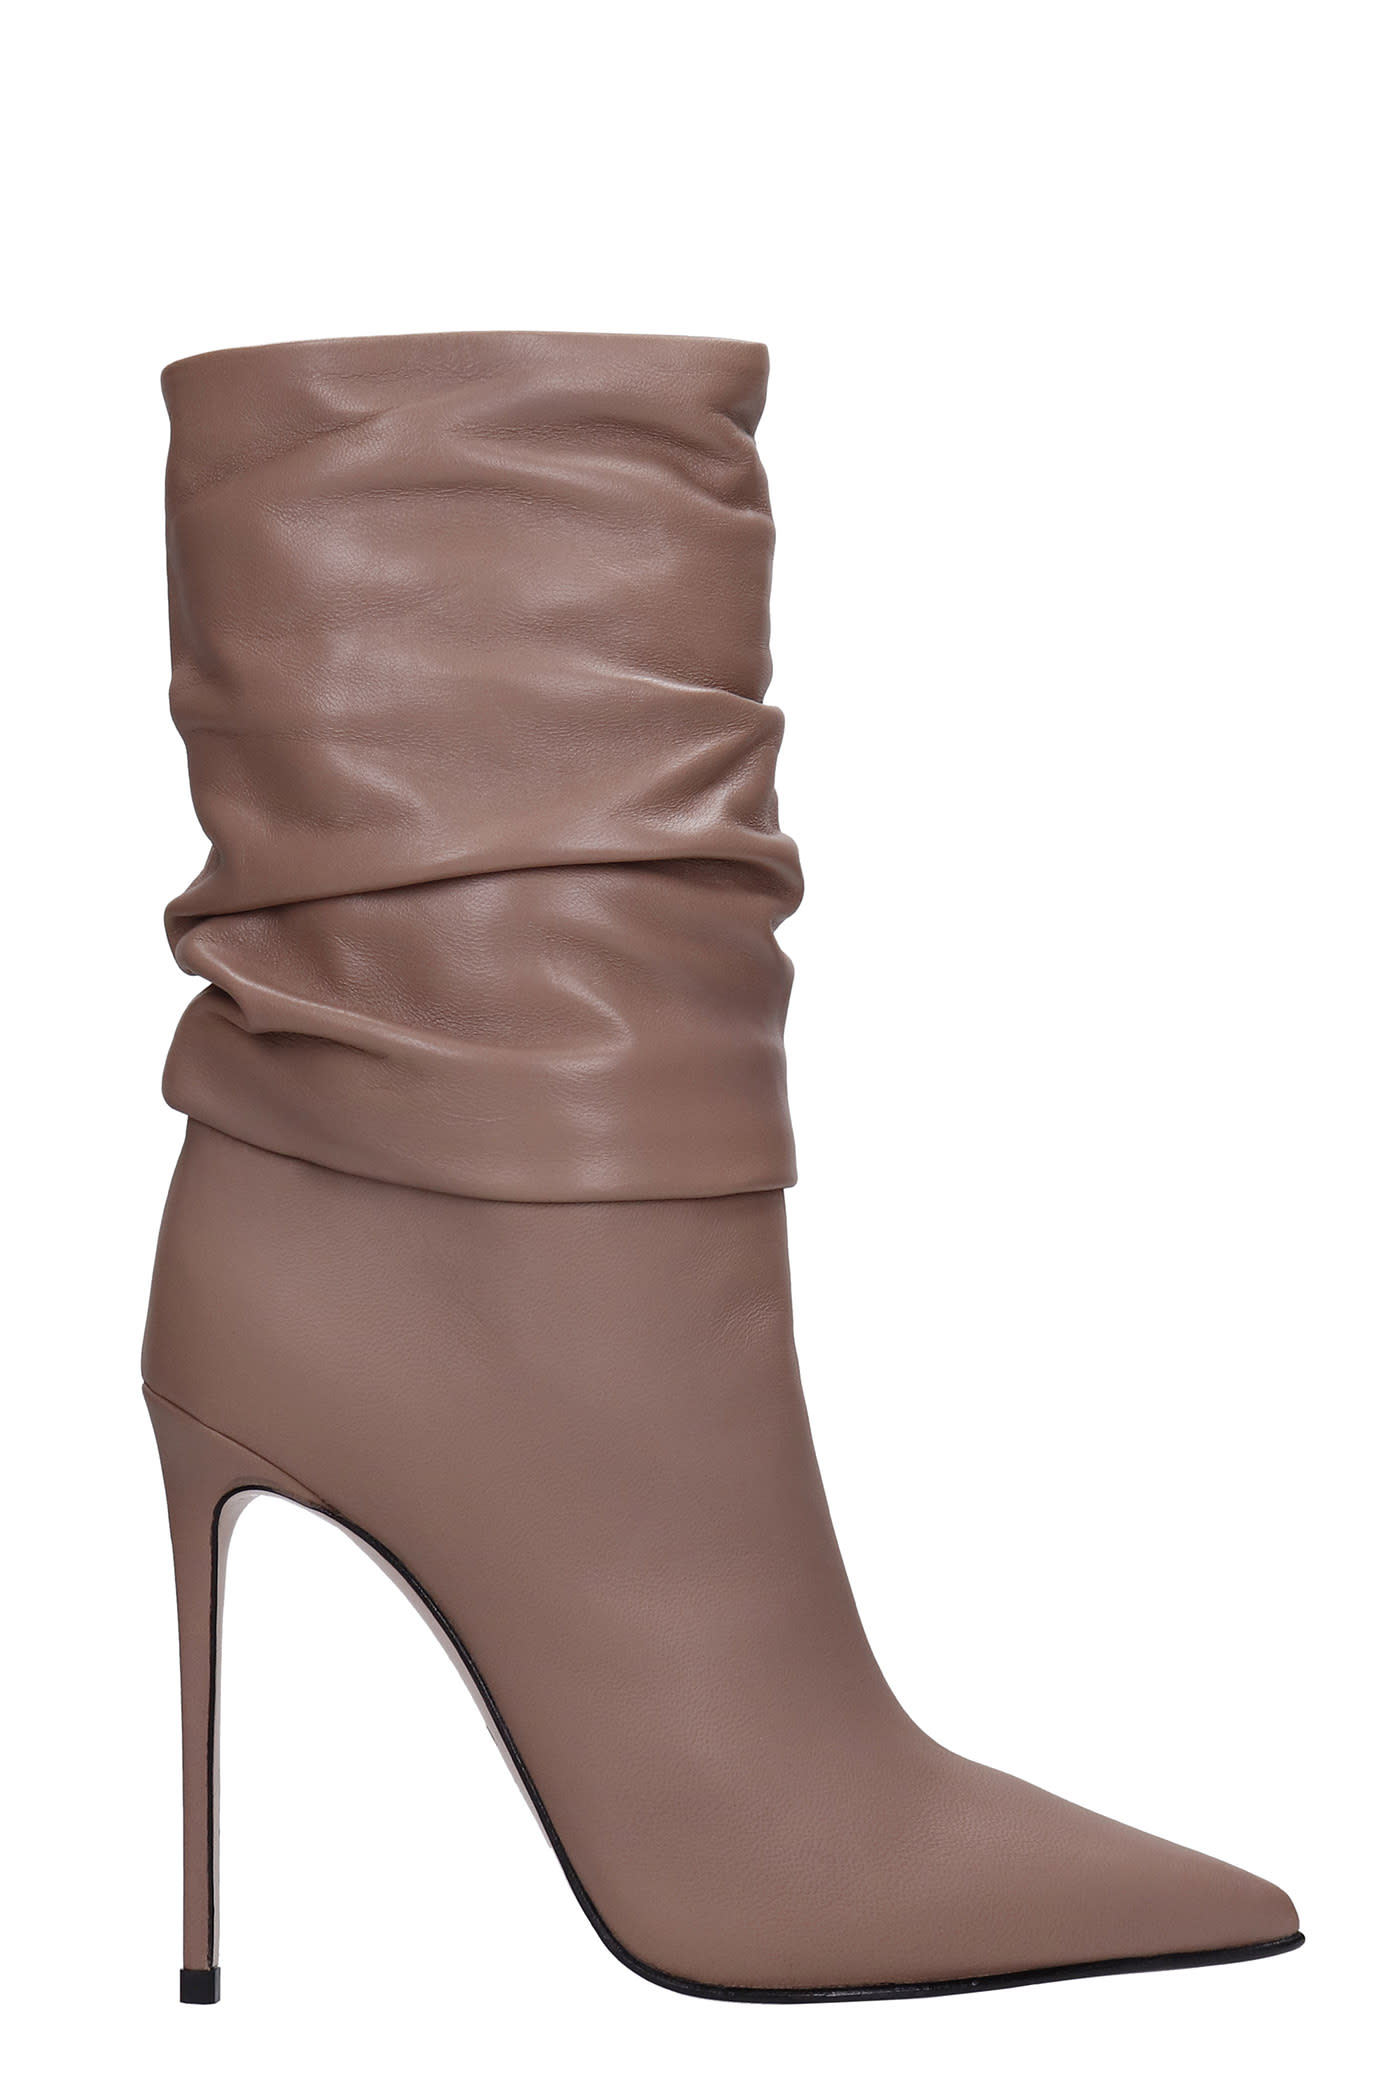 Le Silla High Heels Ankle Boots In Powder Leather